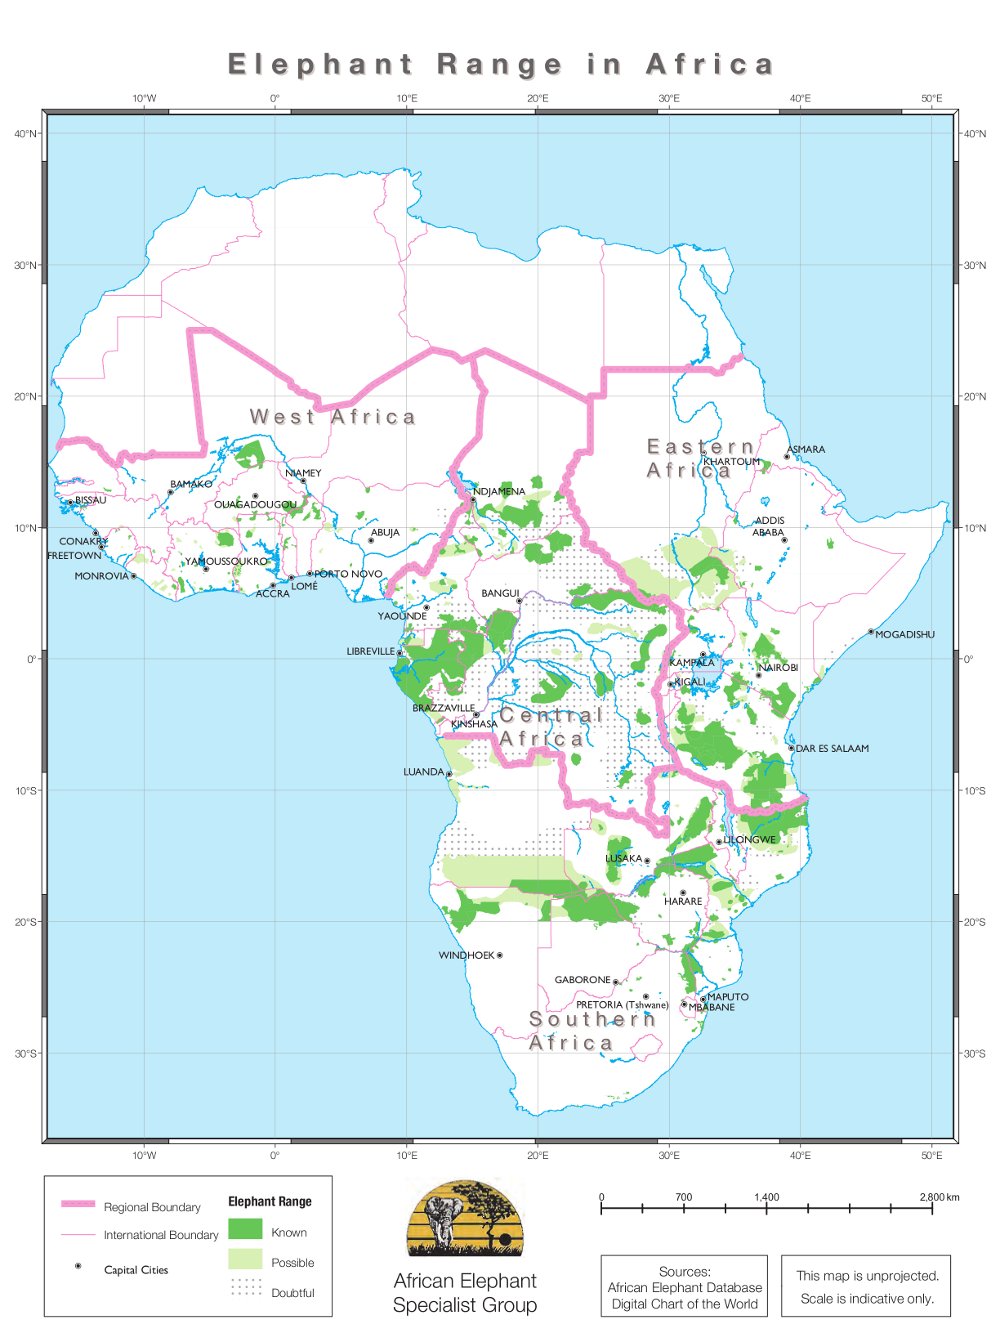 Elephant Distribution Map from WWF